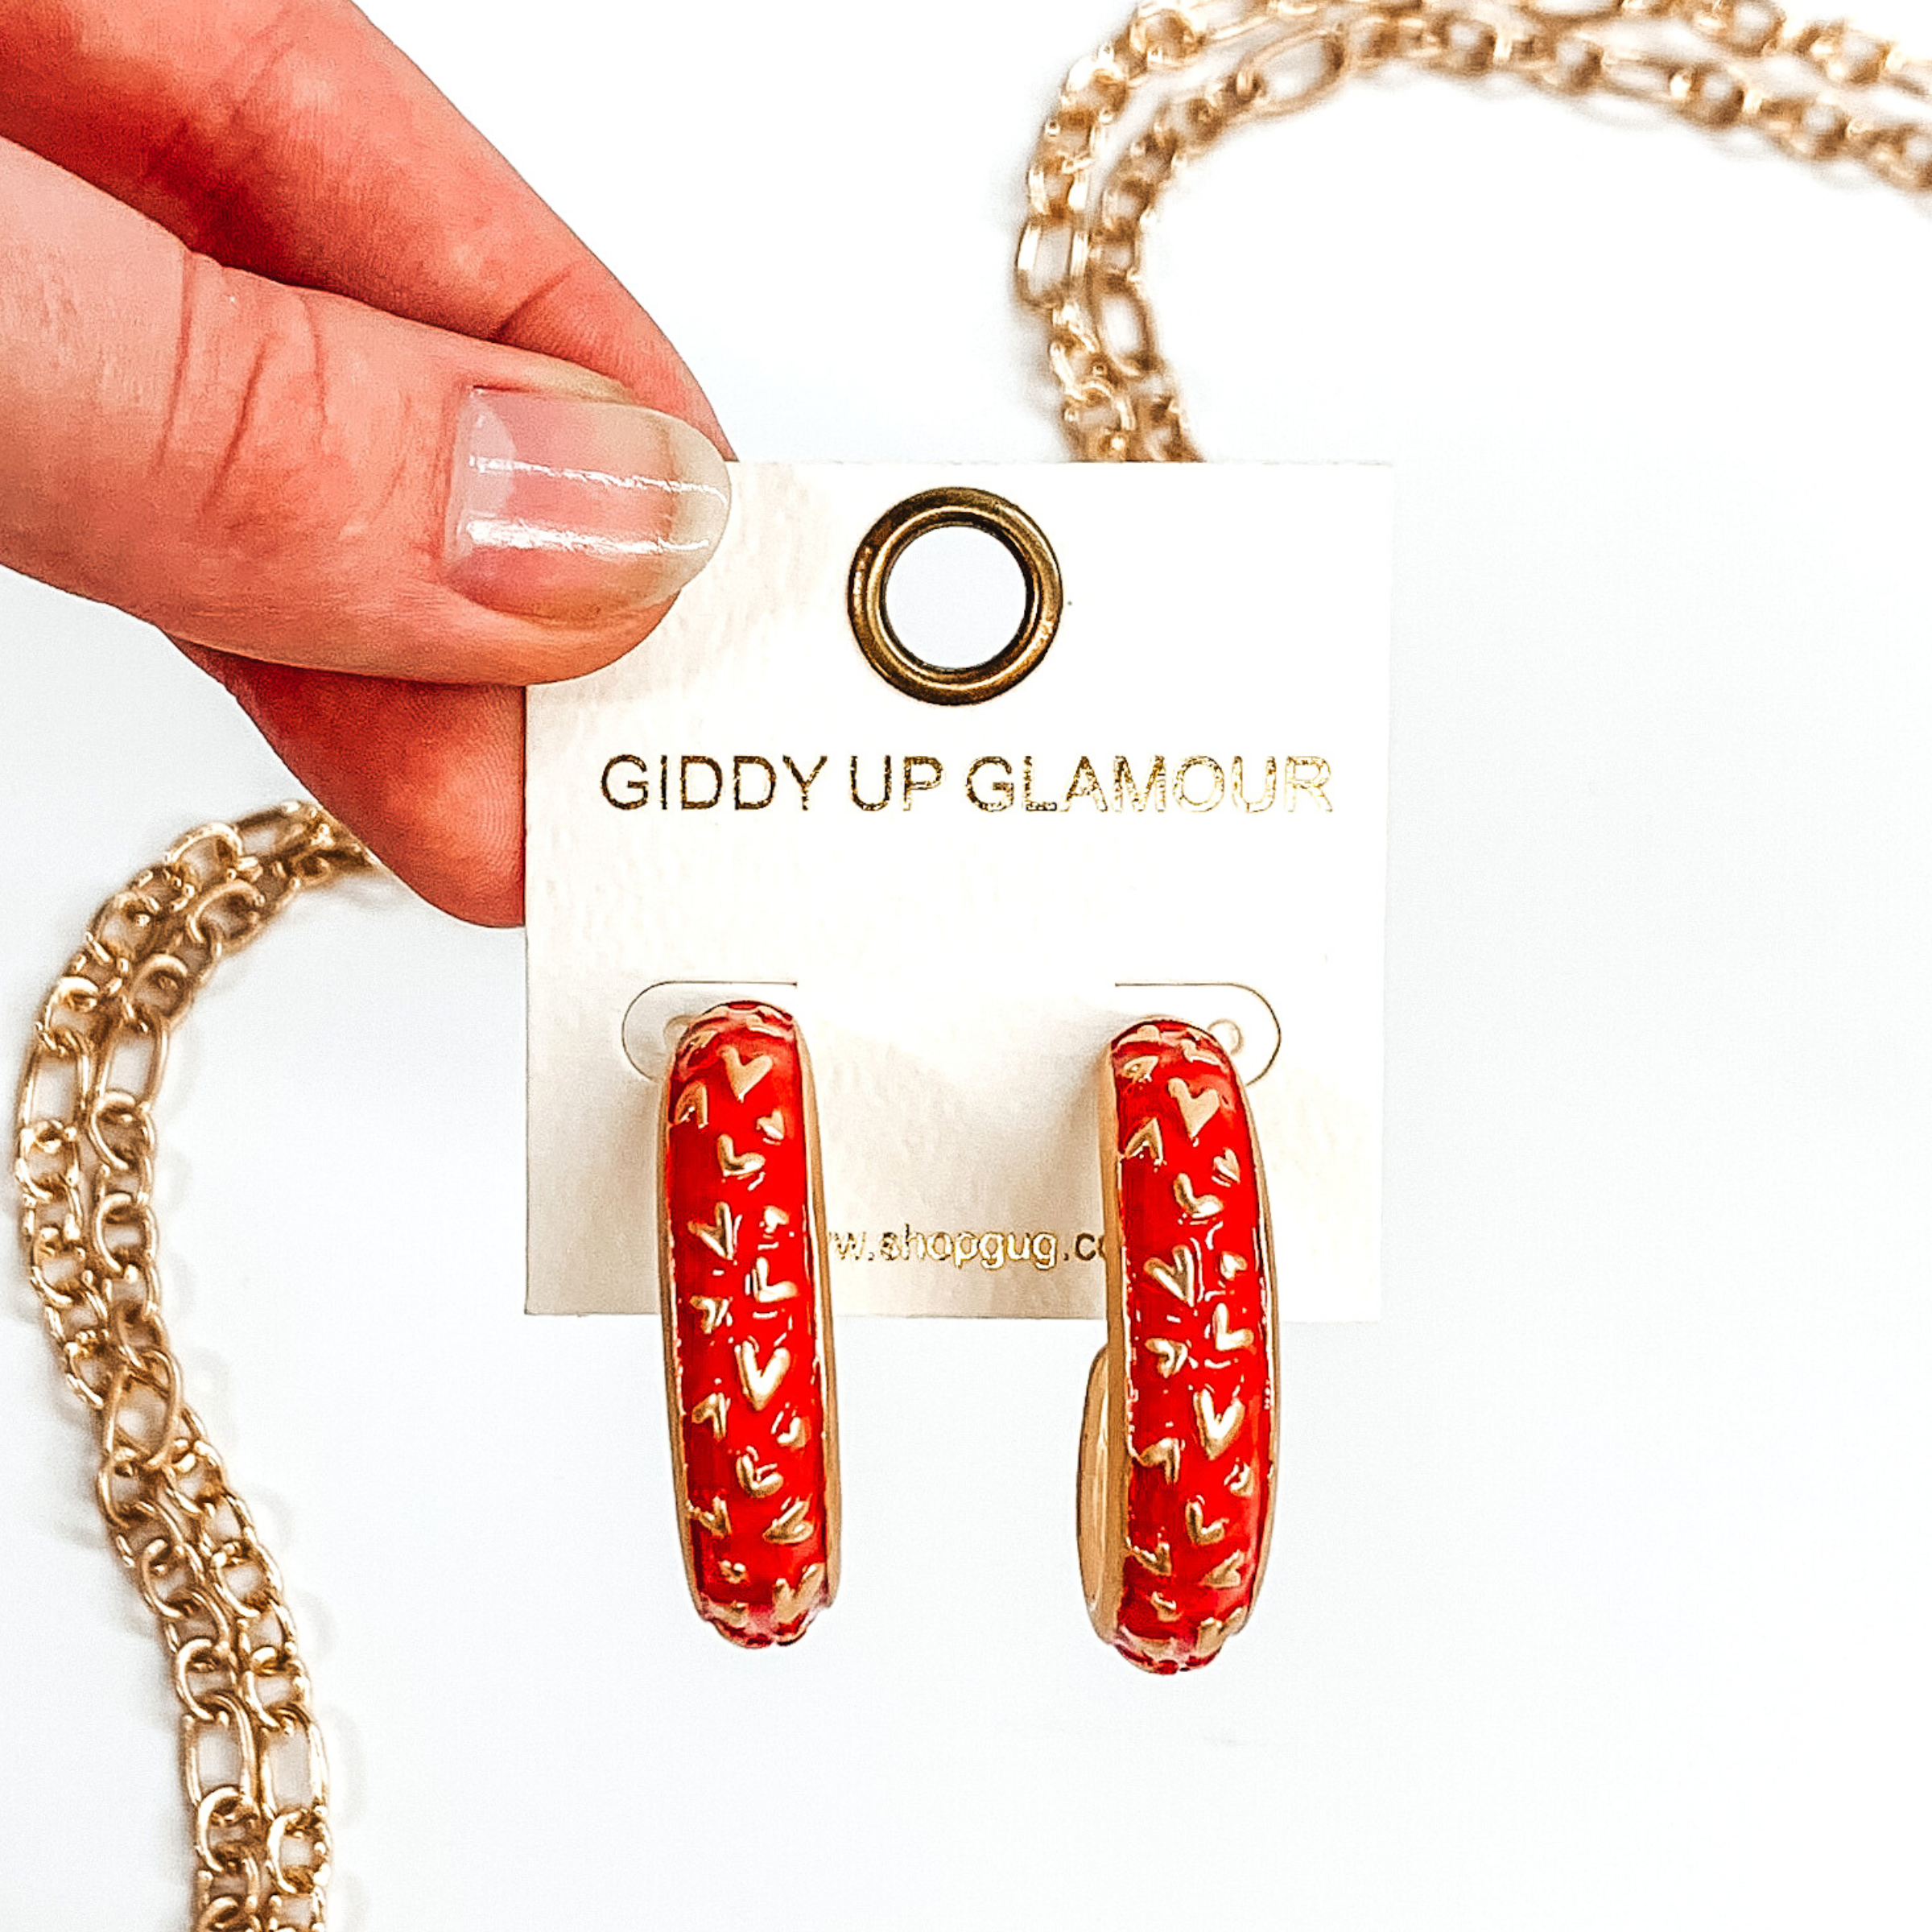 Thick, rounded red hoop earrings with gold outlined and gold heart pattern. These earrings are on a white earring holder held by fingers on a white background that has gold chained decor.